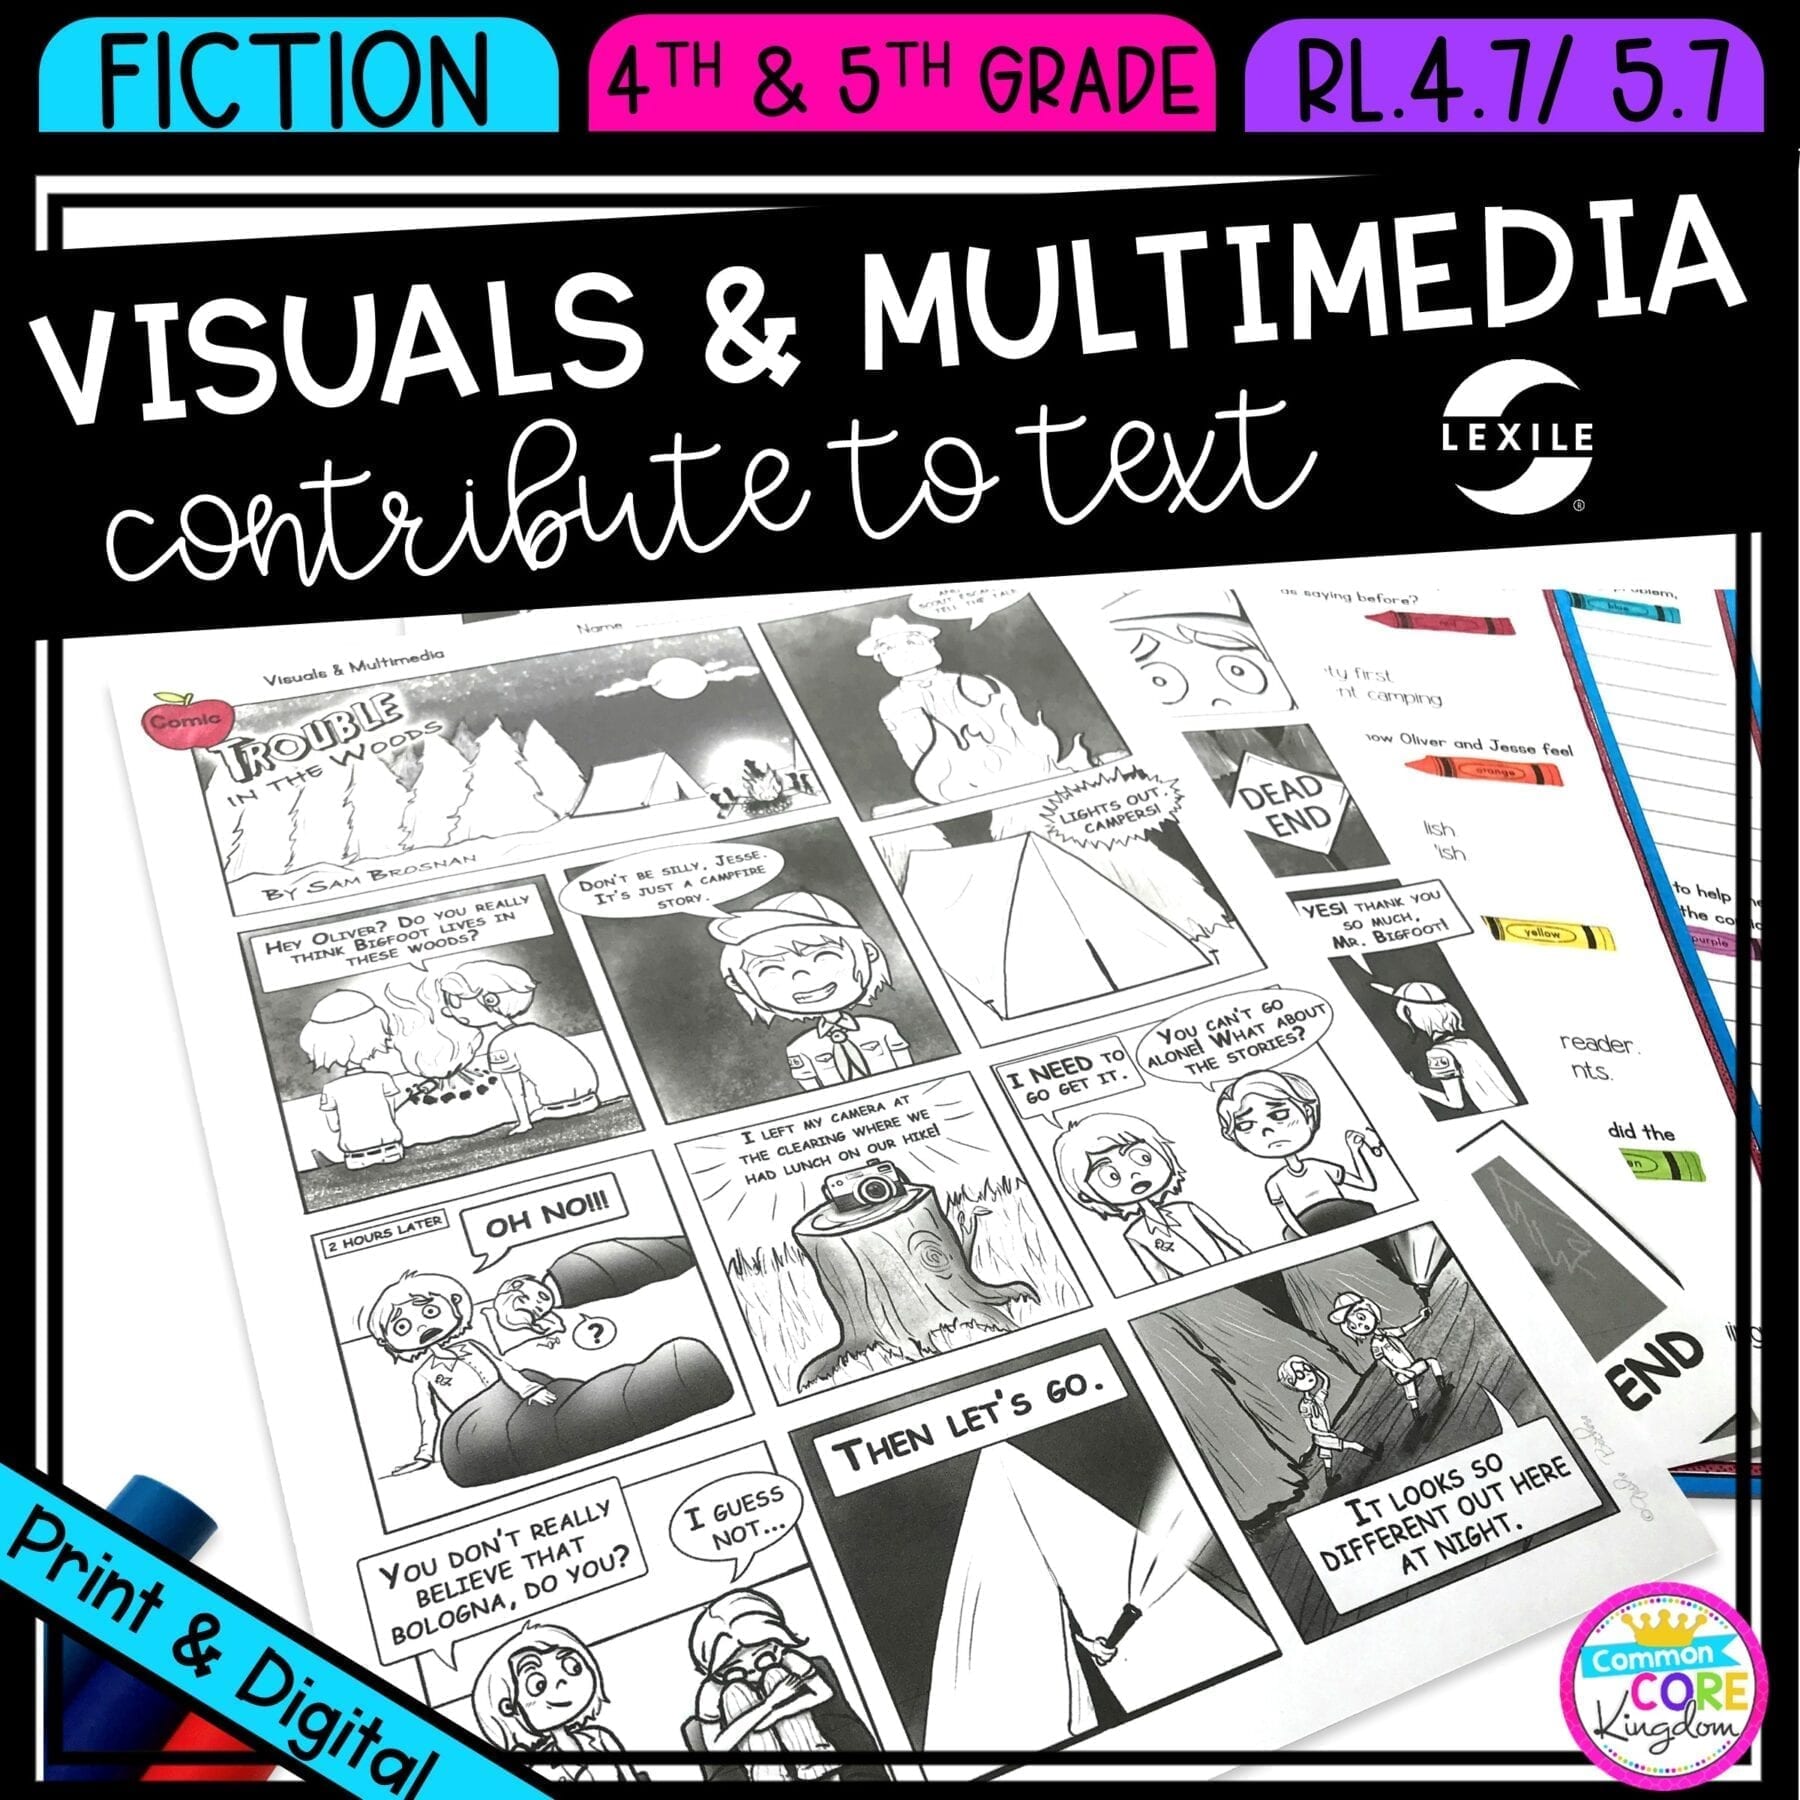 Visuals and Multimedia in Fiction in 4th & 5th grade cover showing printable and digital worksheets